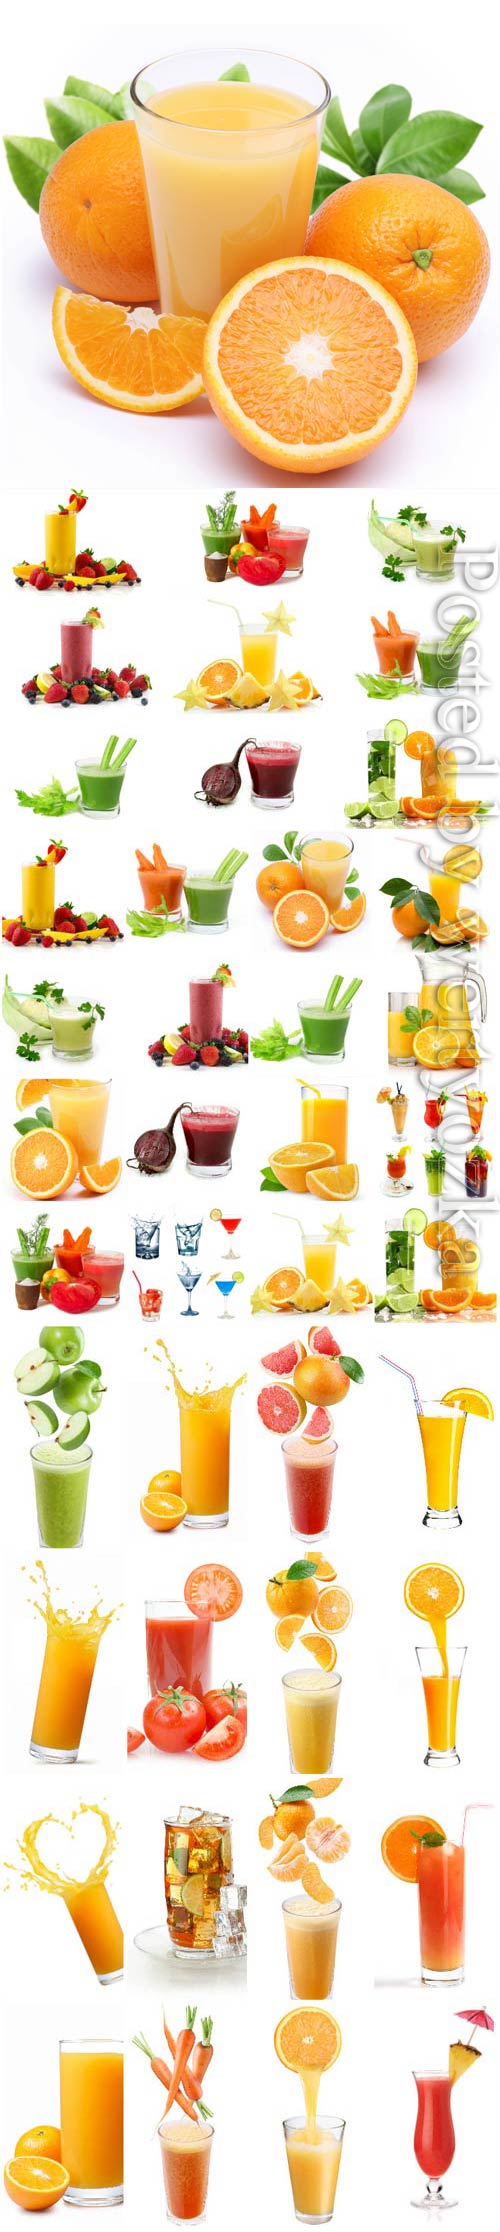 Fresh juices and fruit cocktails stock photo